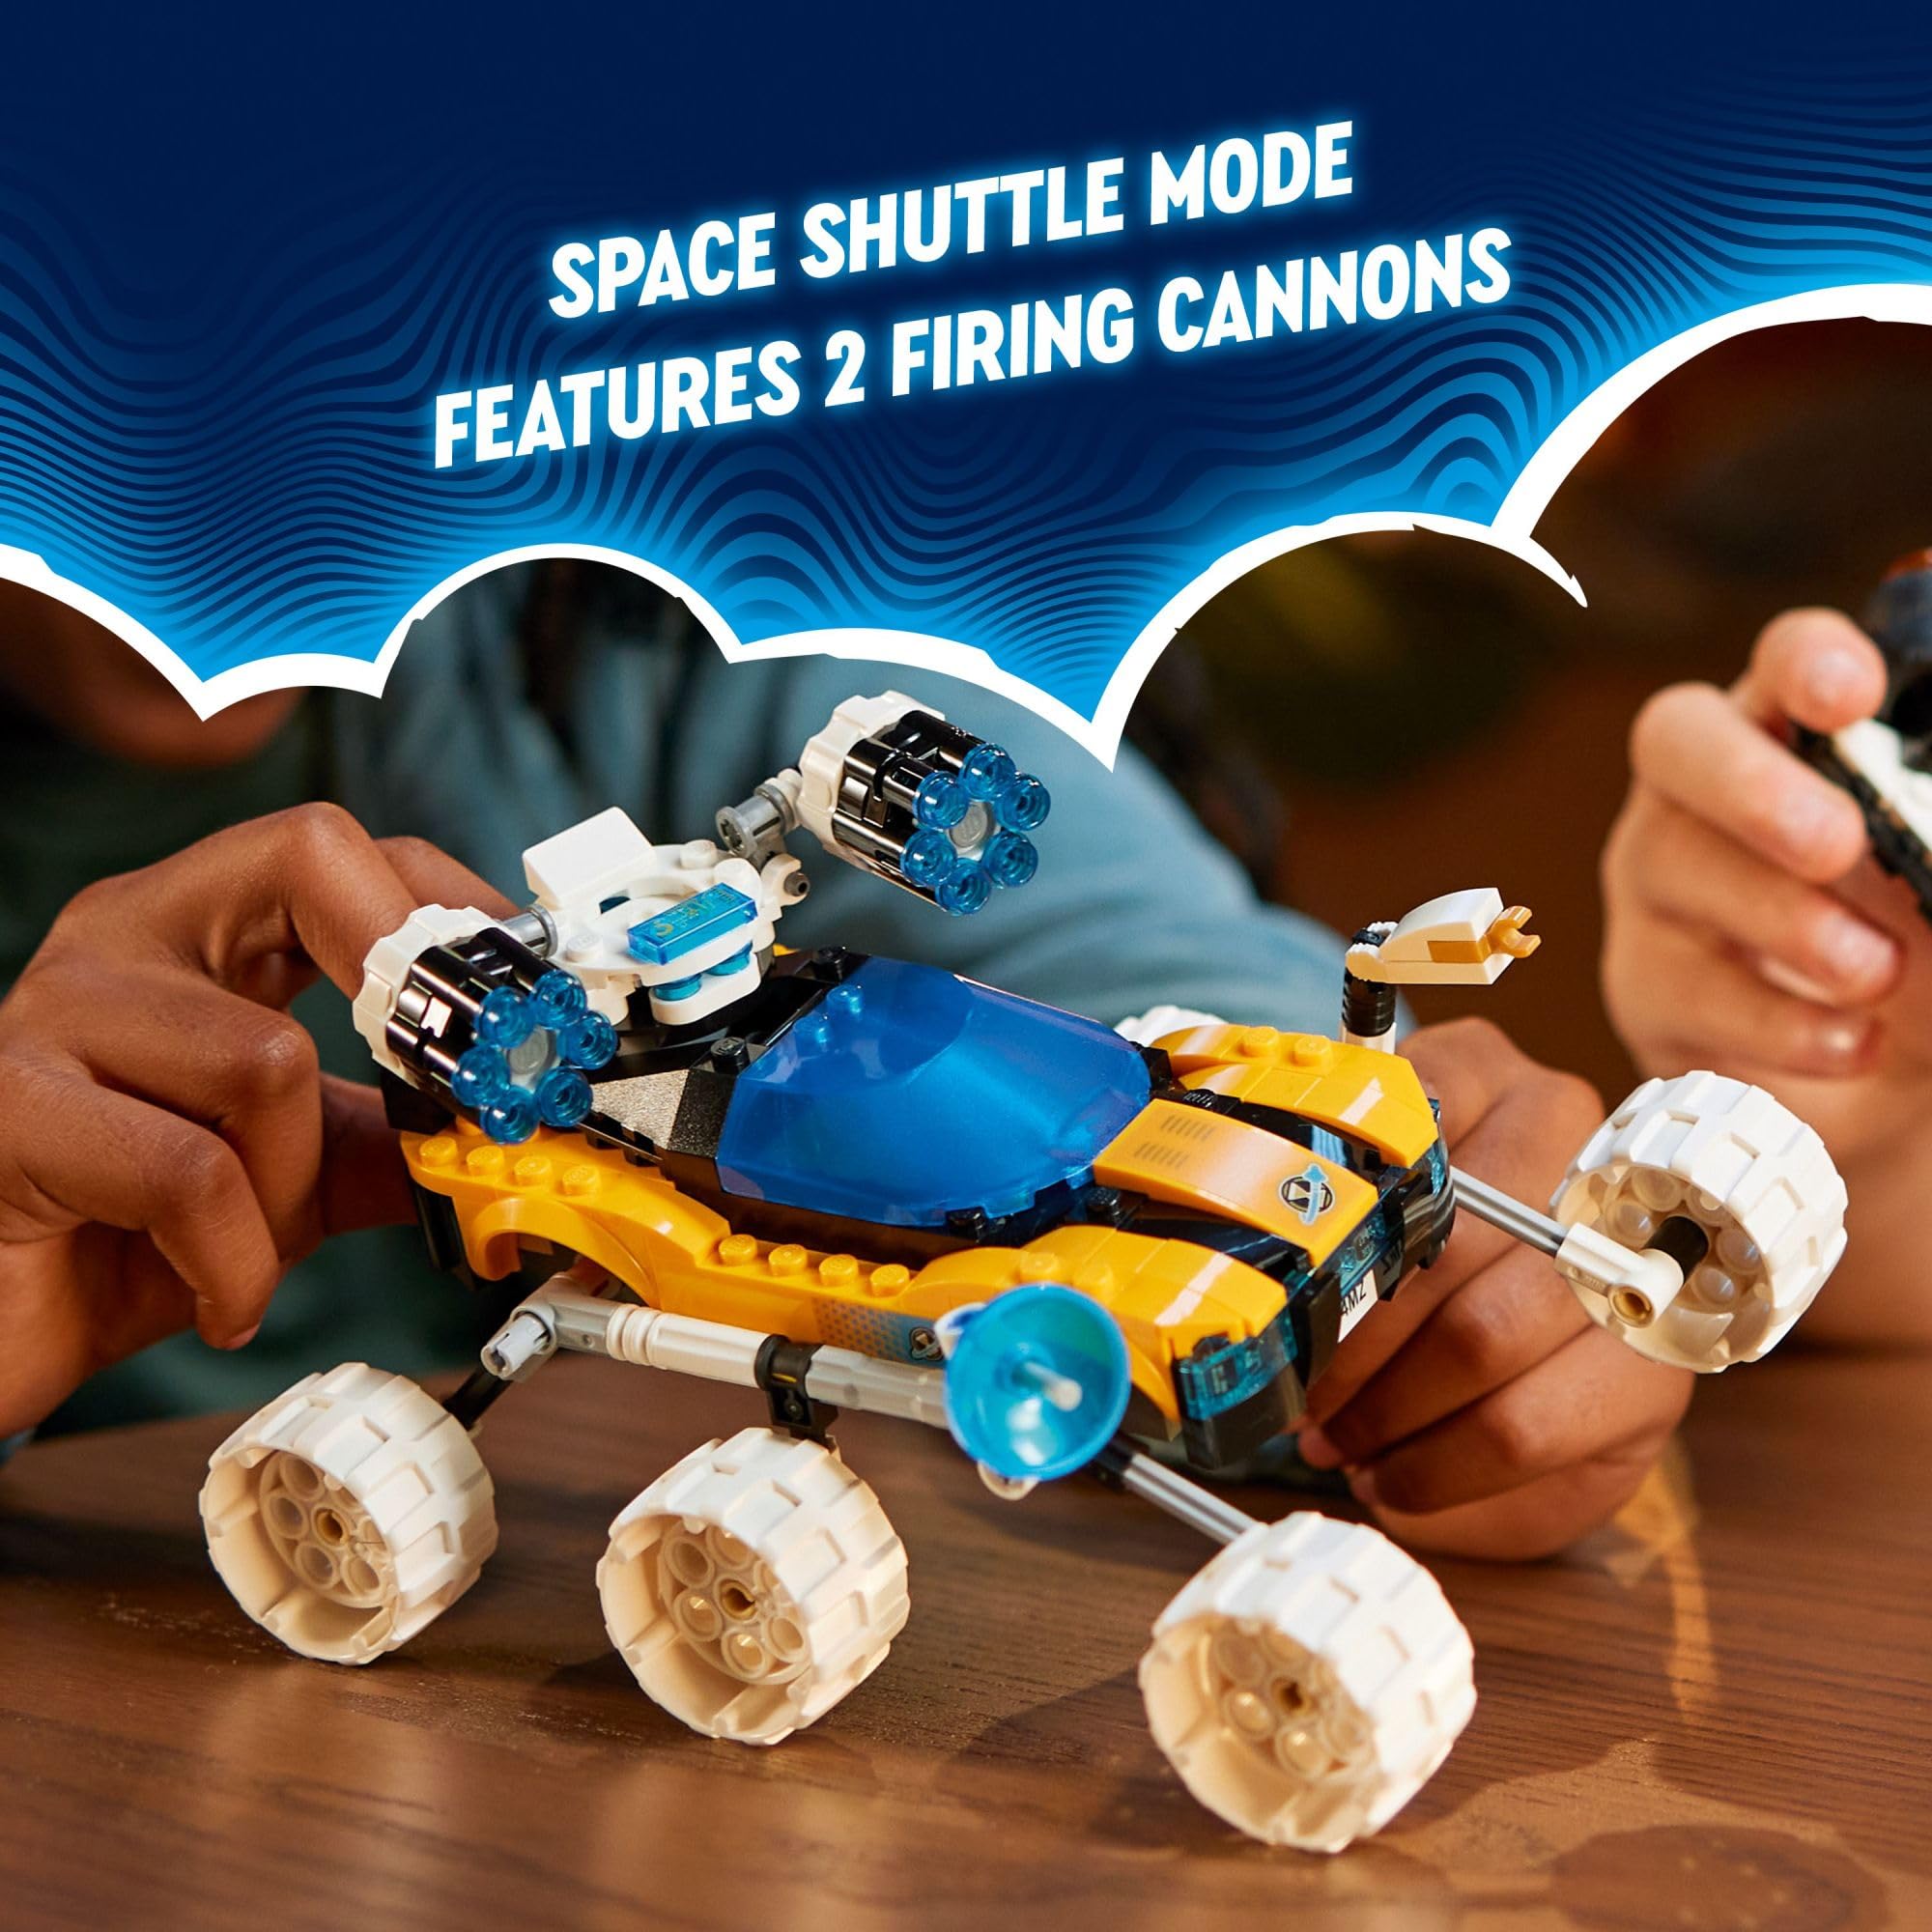 LEGO DREAMZzz Mr. Oz’s Space Car Toy, Transforming Vehicle Building Set, Includes TV Show Minifigures Mr. Oz, Albert and Jayden, Space Shuttle Toy Gift for Boys and Girls Aged 8 and Up, 71475